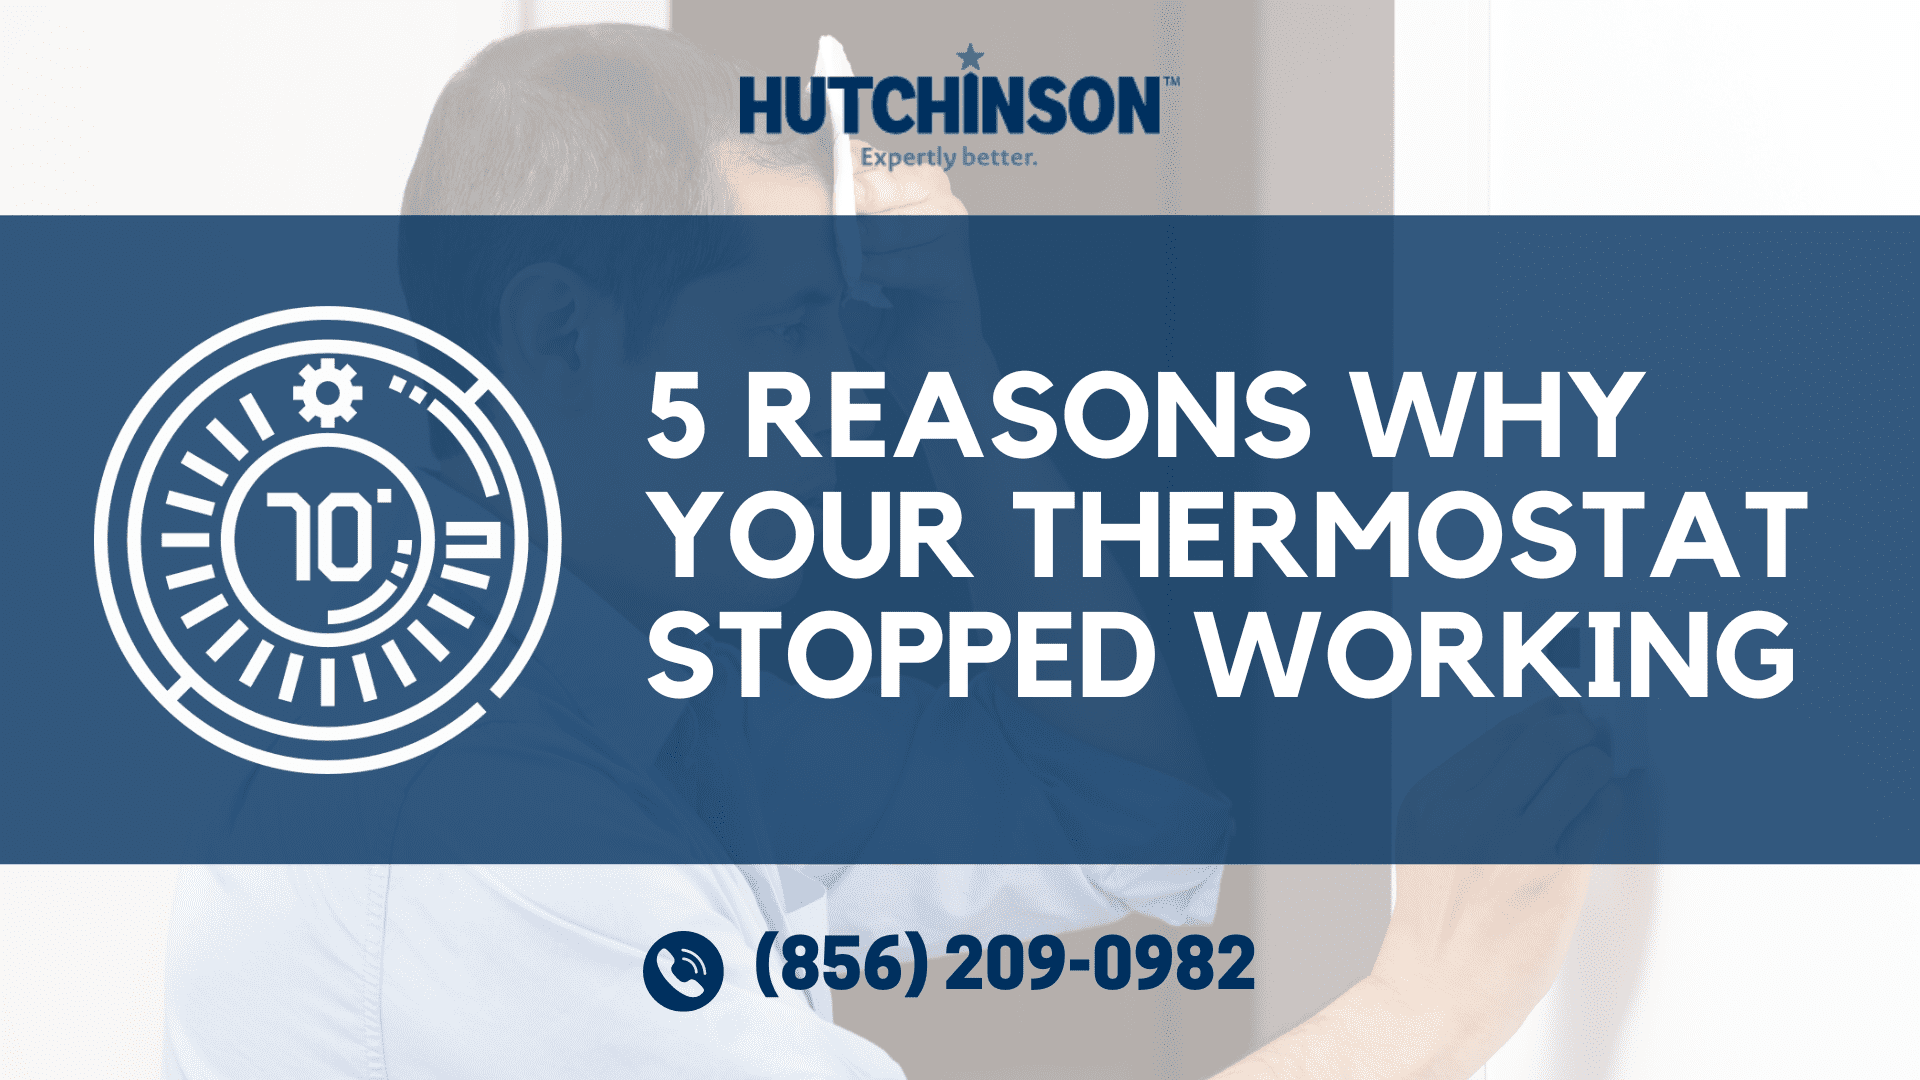 https://www.hutchbiz.com/wp-content/uploads/2022/05/5-Reasons-Why-Your-Thermostat-Stopped-Working.png